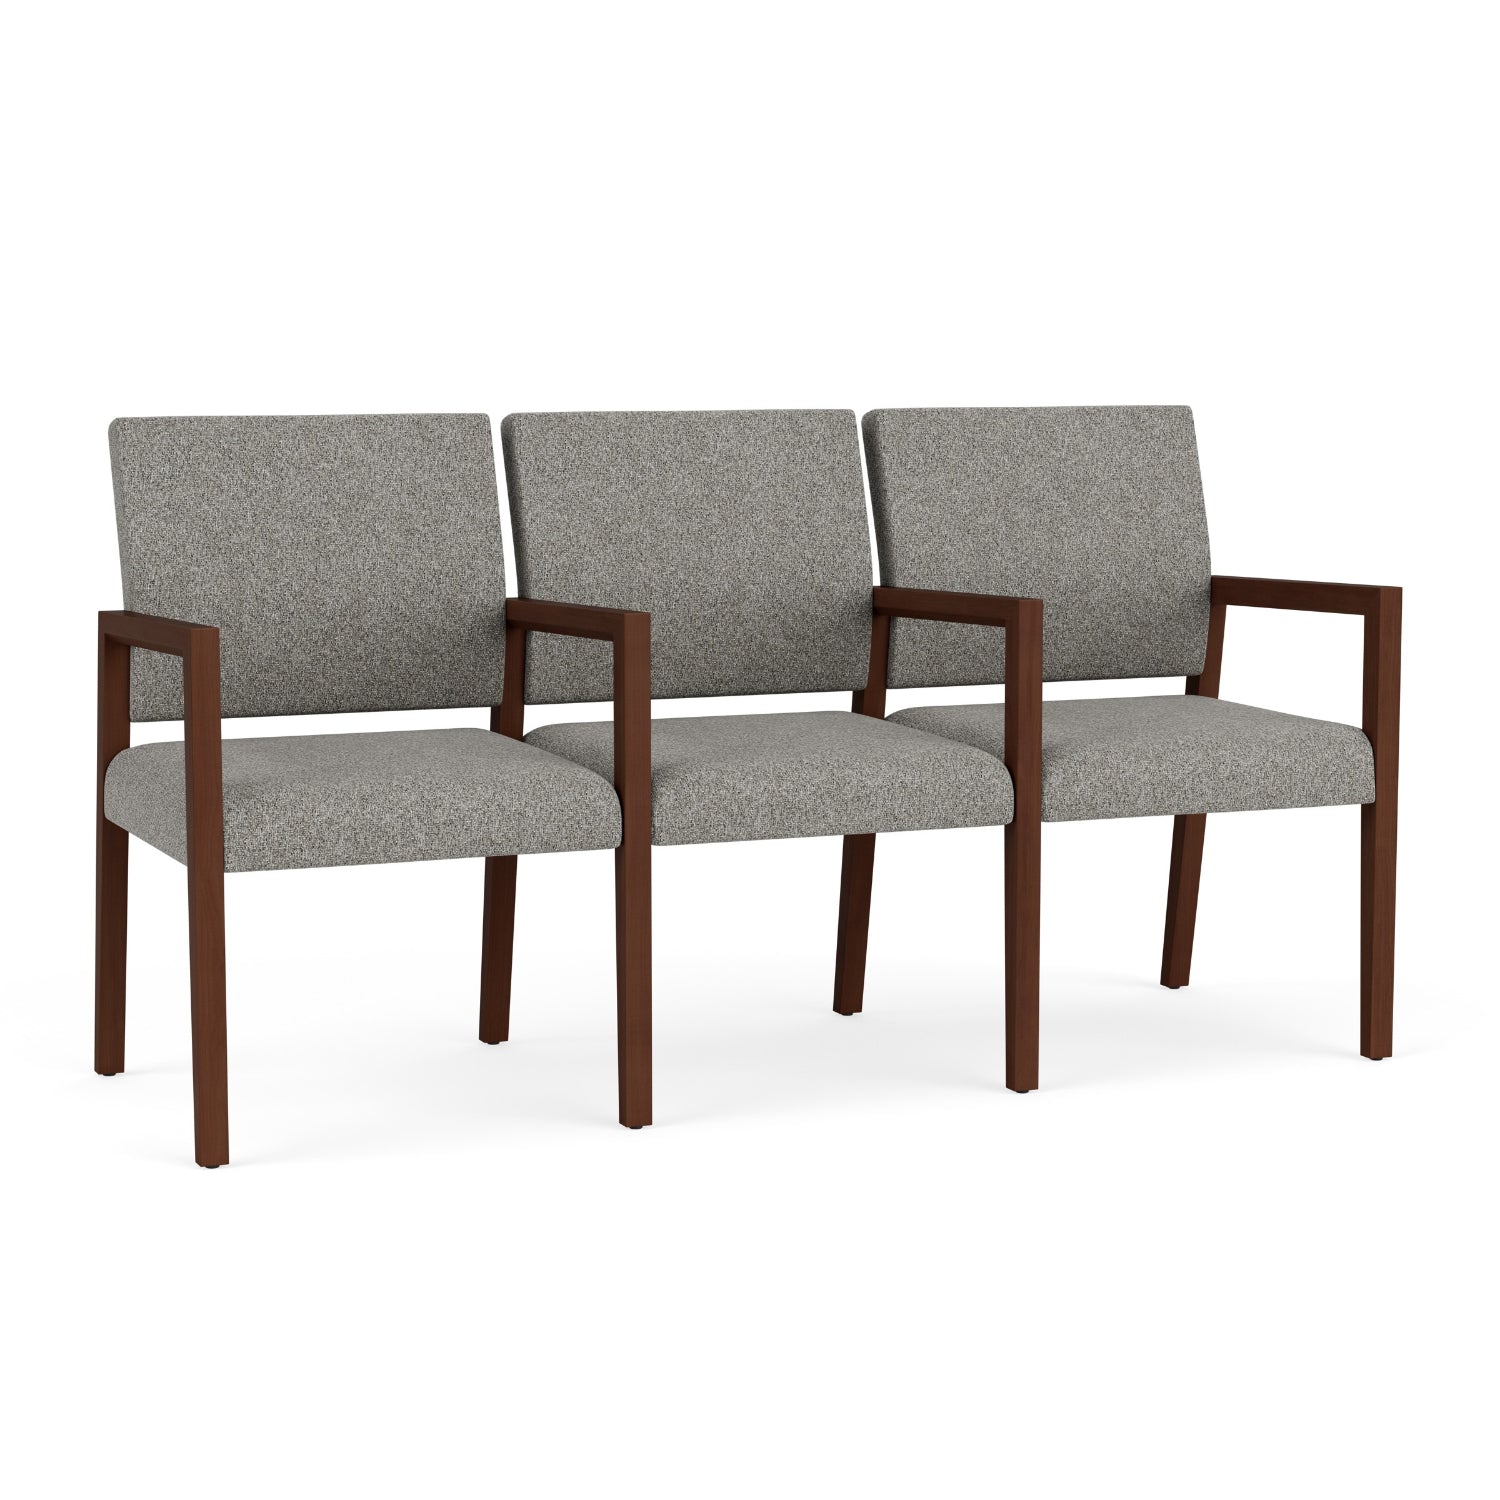 Brooklyn Collection Reception Seating, 3 Seats with Center Arms, Standard Fabric Upholstery, FREE SHIPPING